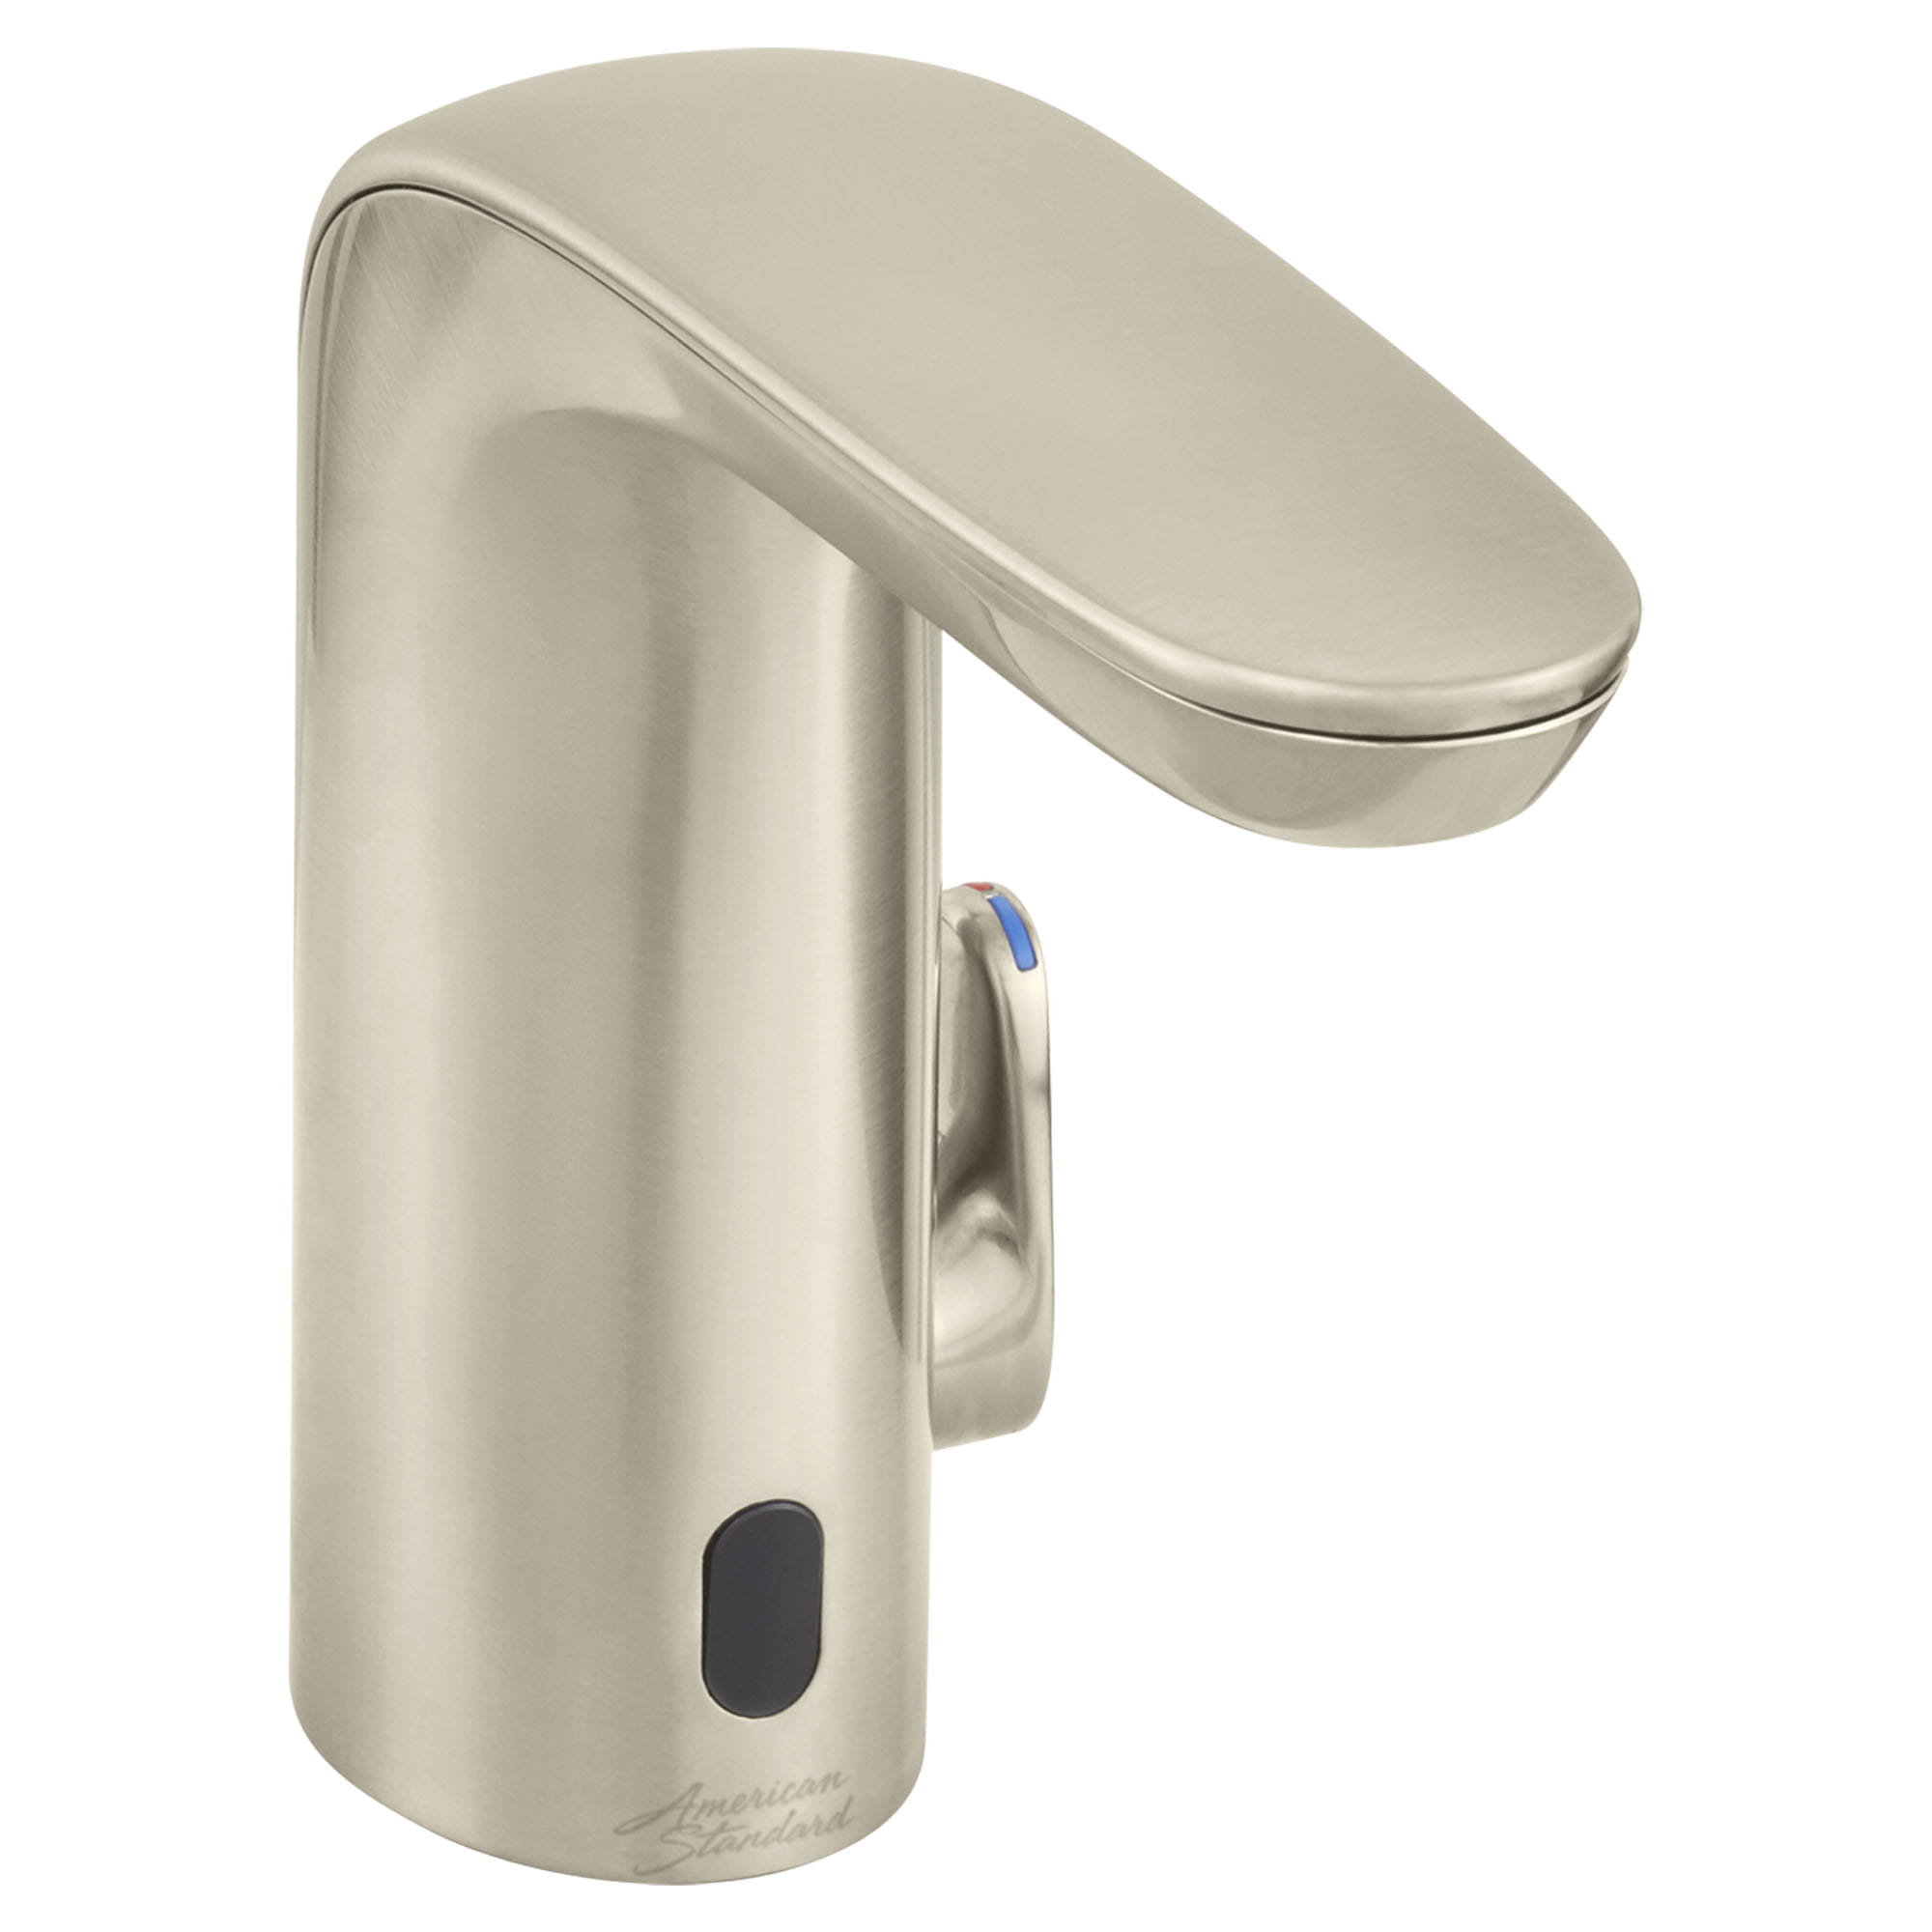 NextGen™ Selectronic® Touchless Faucet, Battery-Powered With SmarTherm Safety Shut-Off + ADM, 0.35 gpm/1.3 Lpm